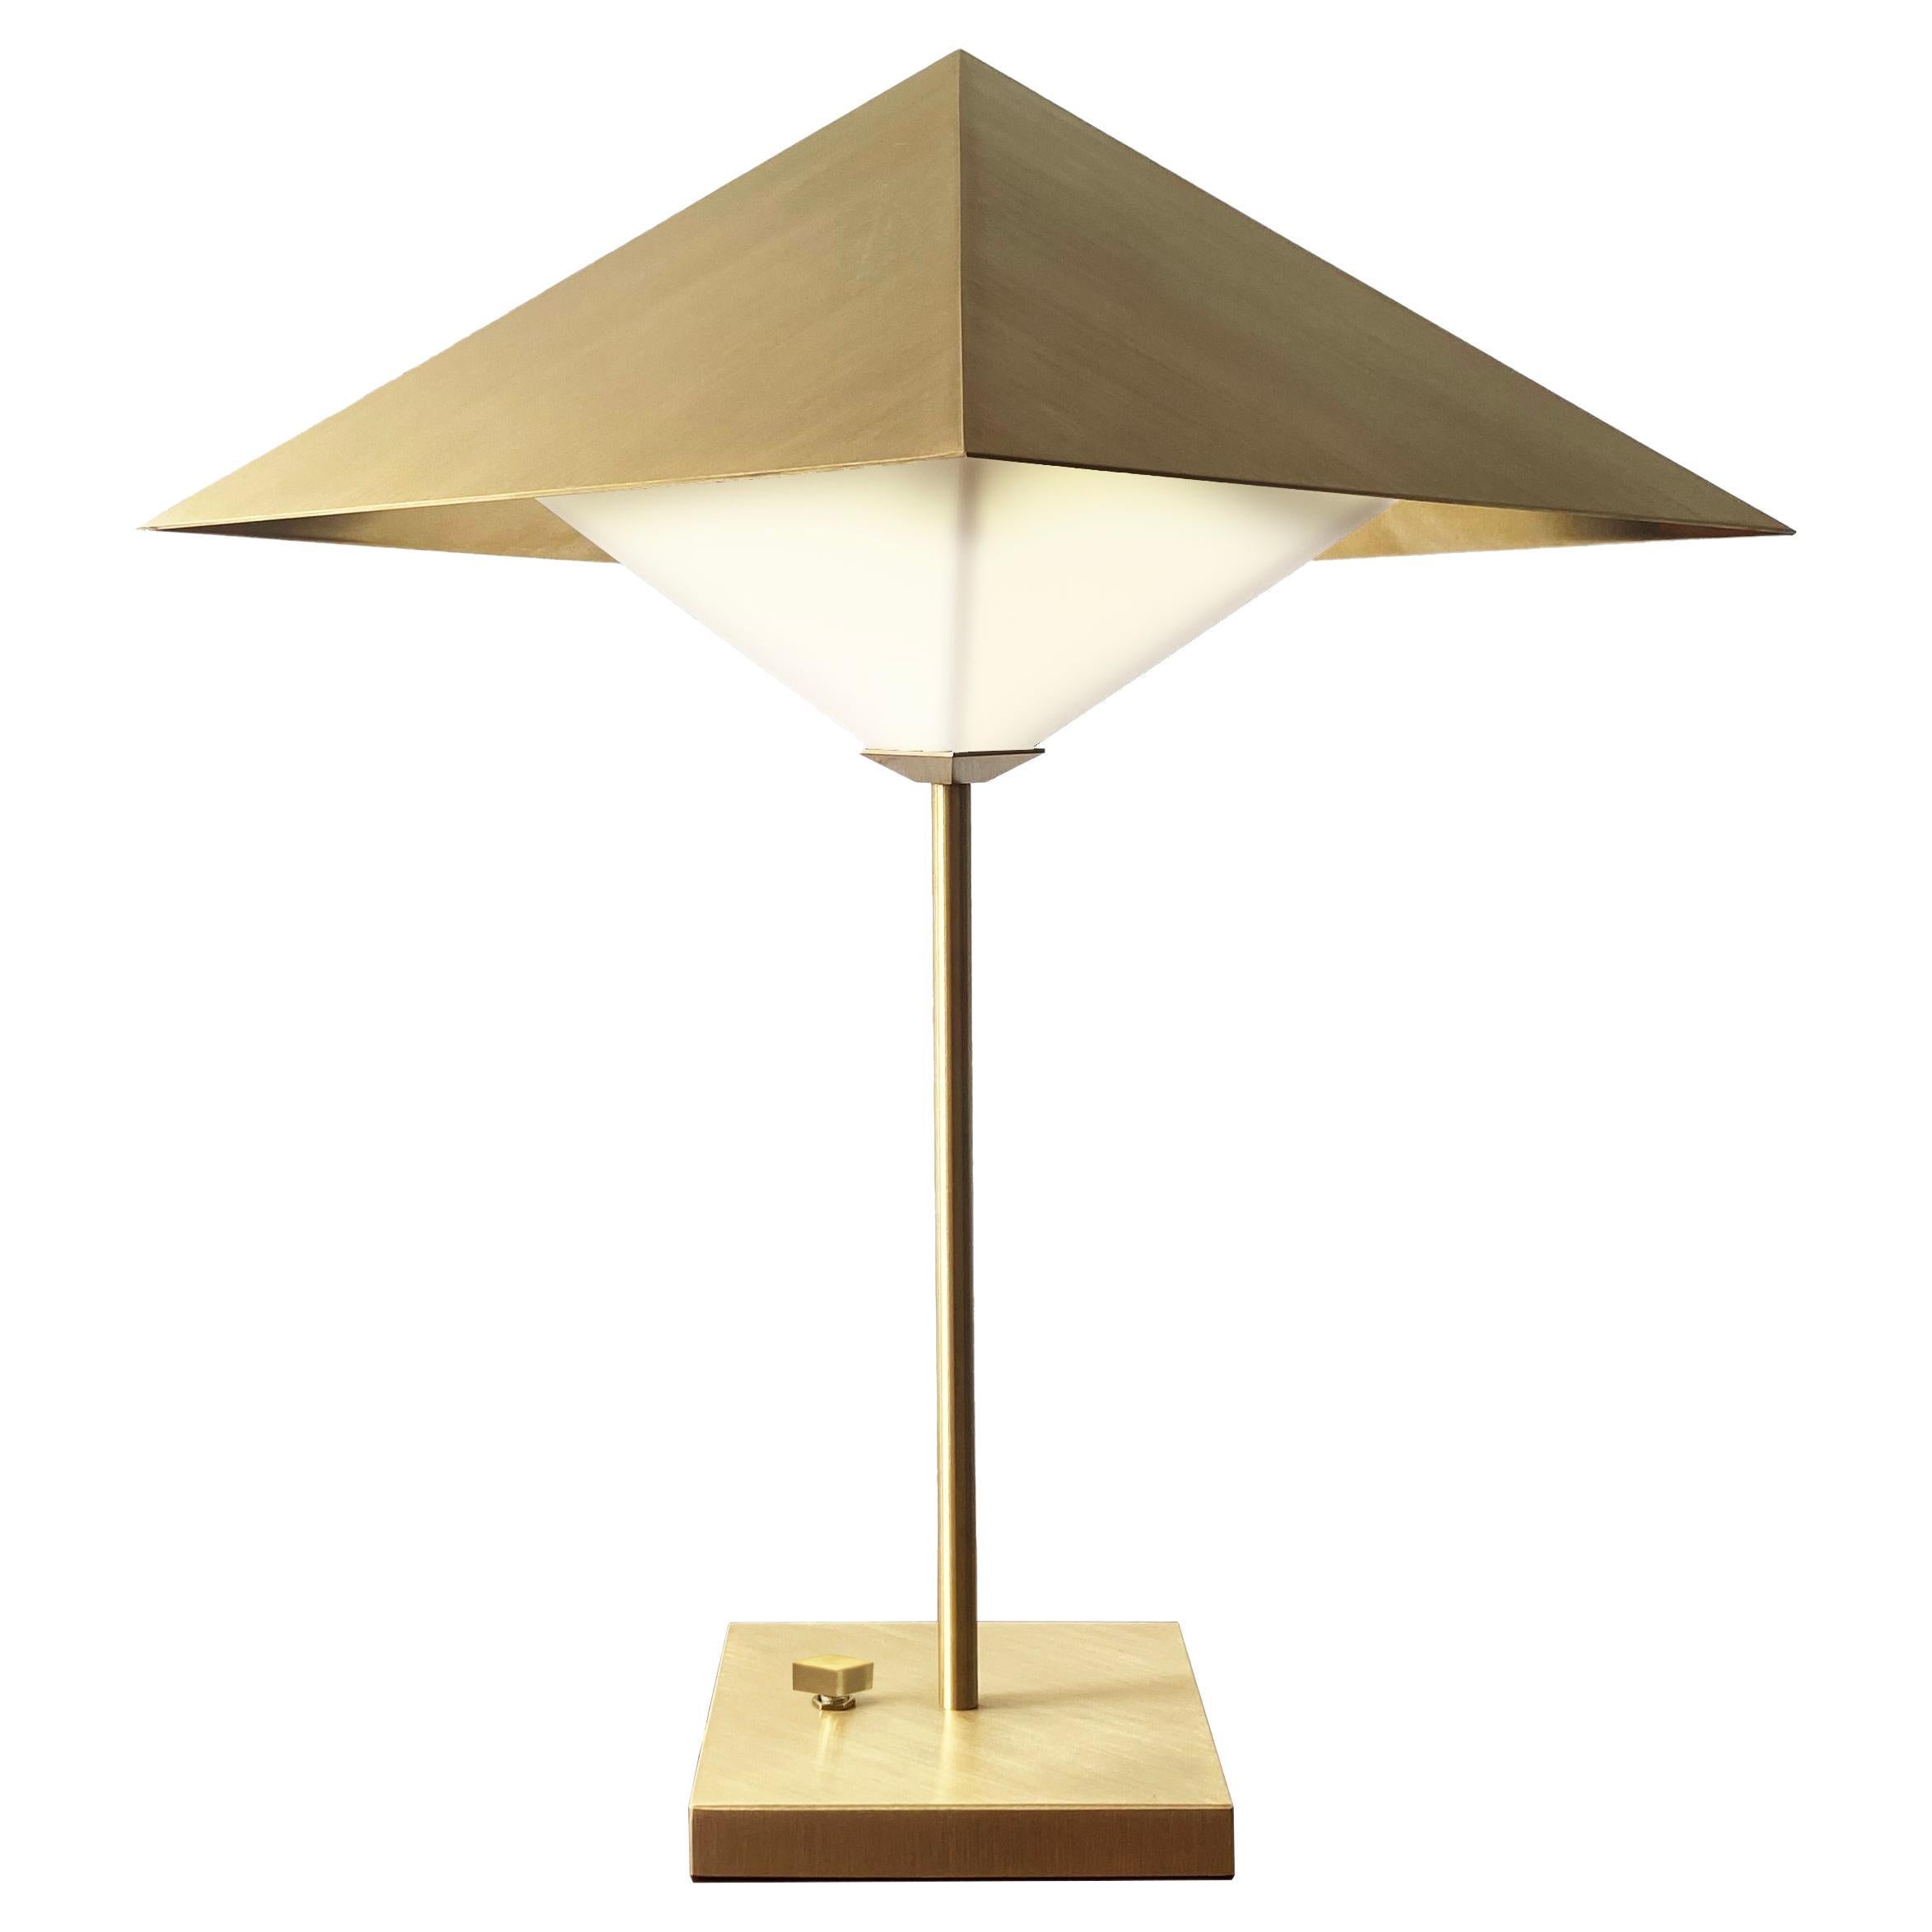 Octa Table Lamp Brass by Diaphan Studio, Represented by Tuleste Factory For Sale